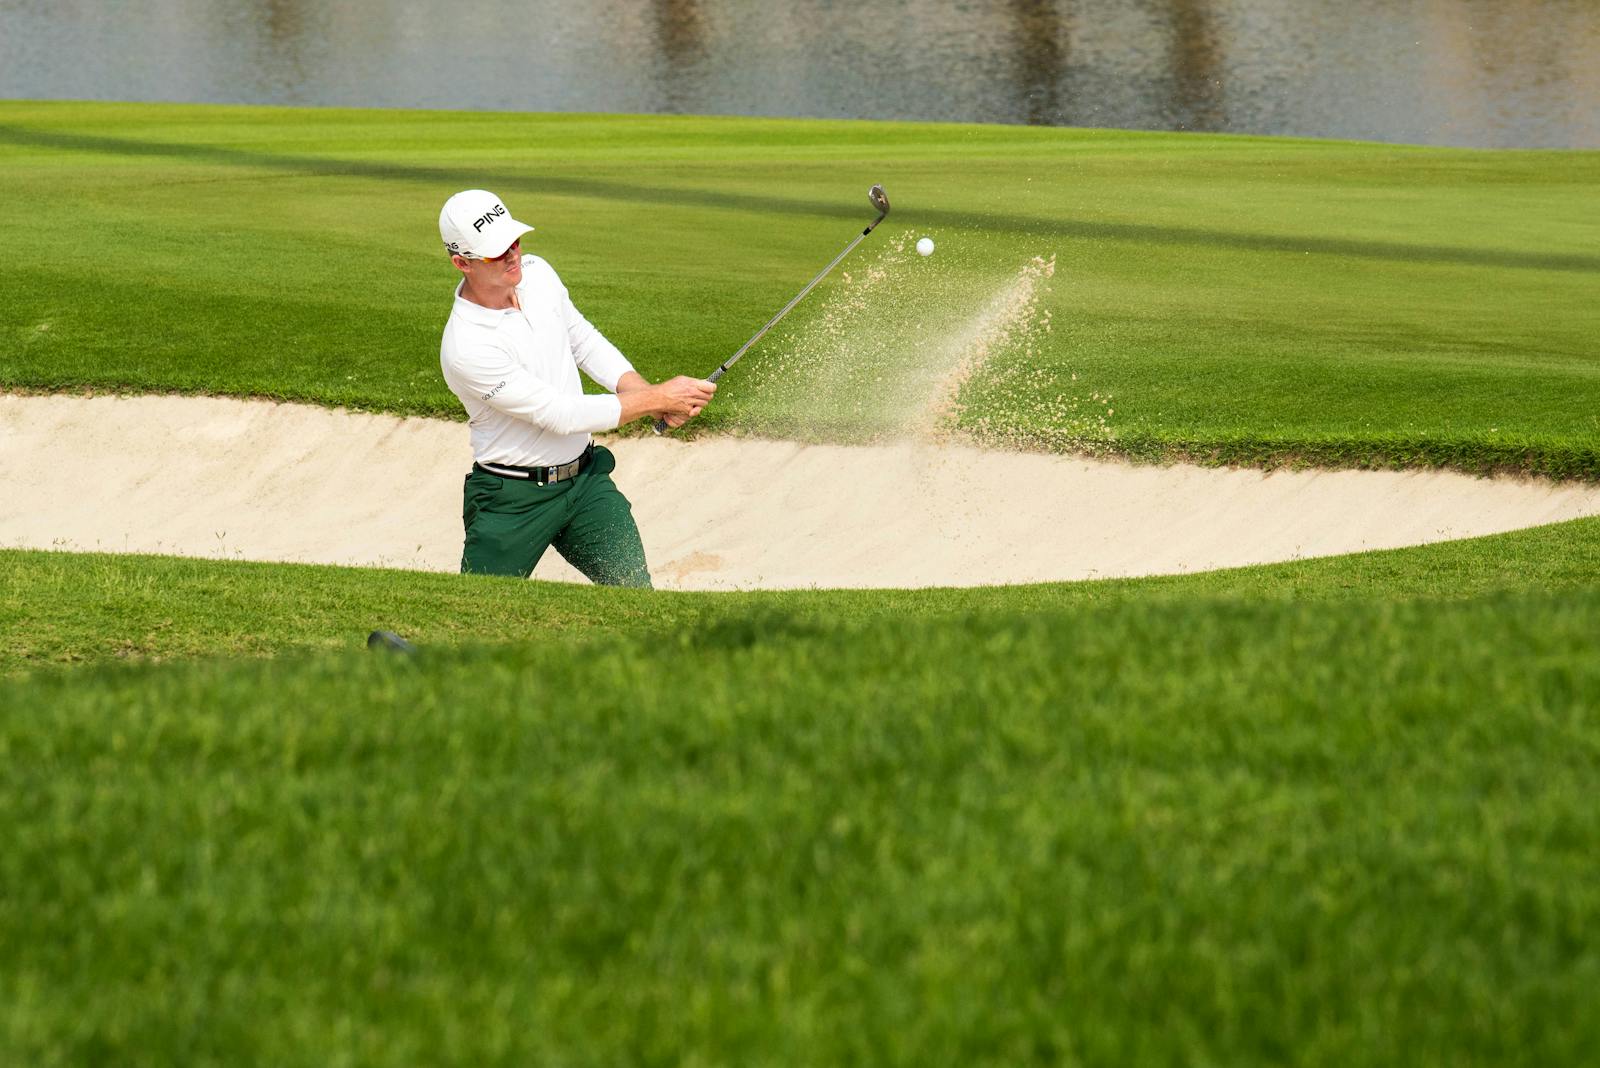 Man Hitting the Ball with a Club in Golf